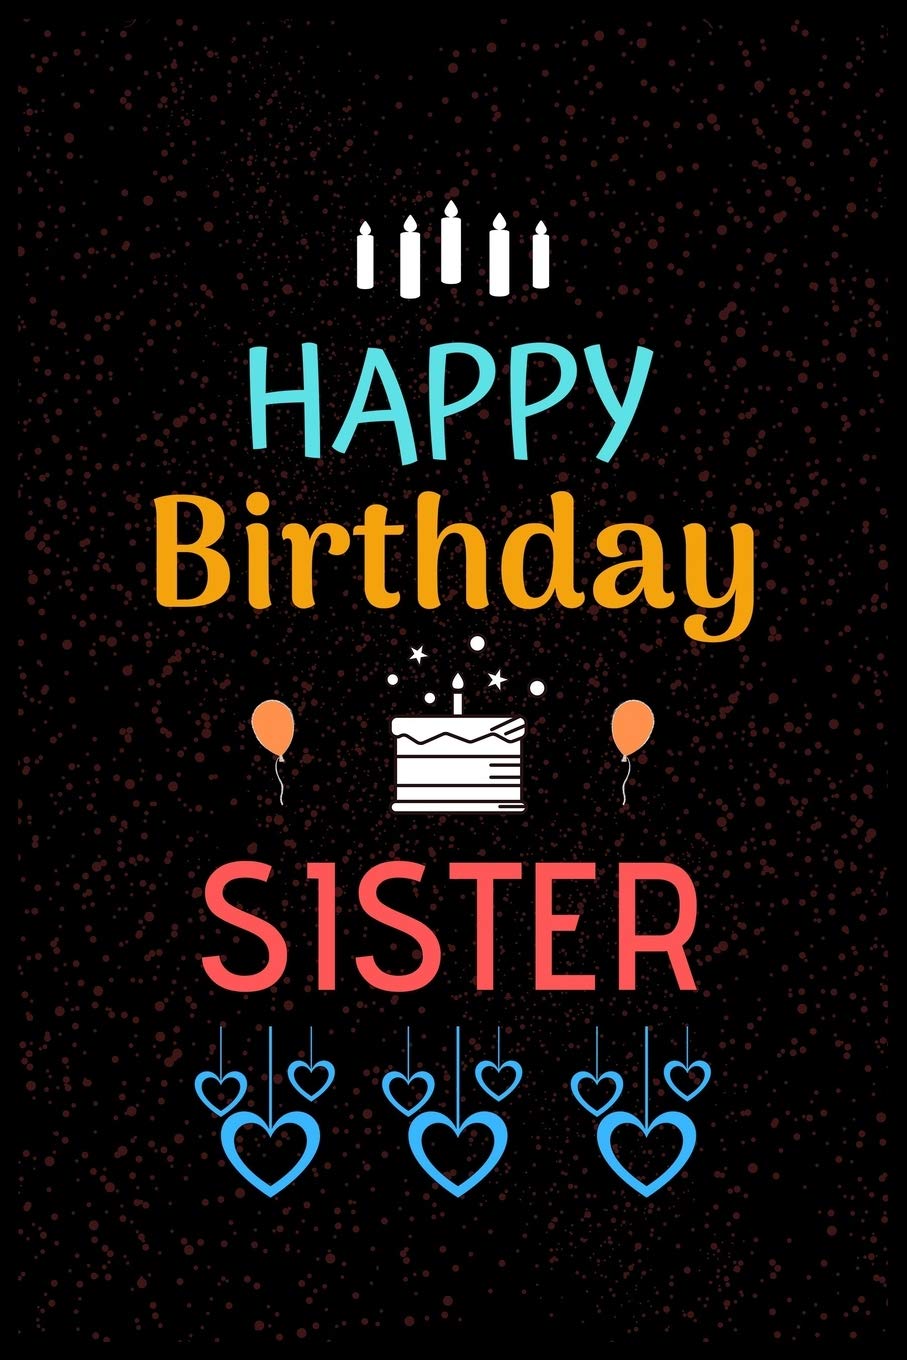 Happiest Birthday To A Wonderful Sister